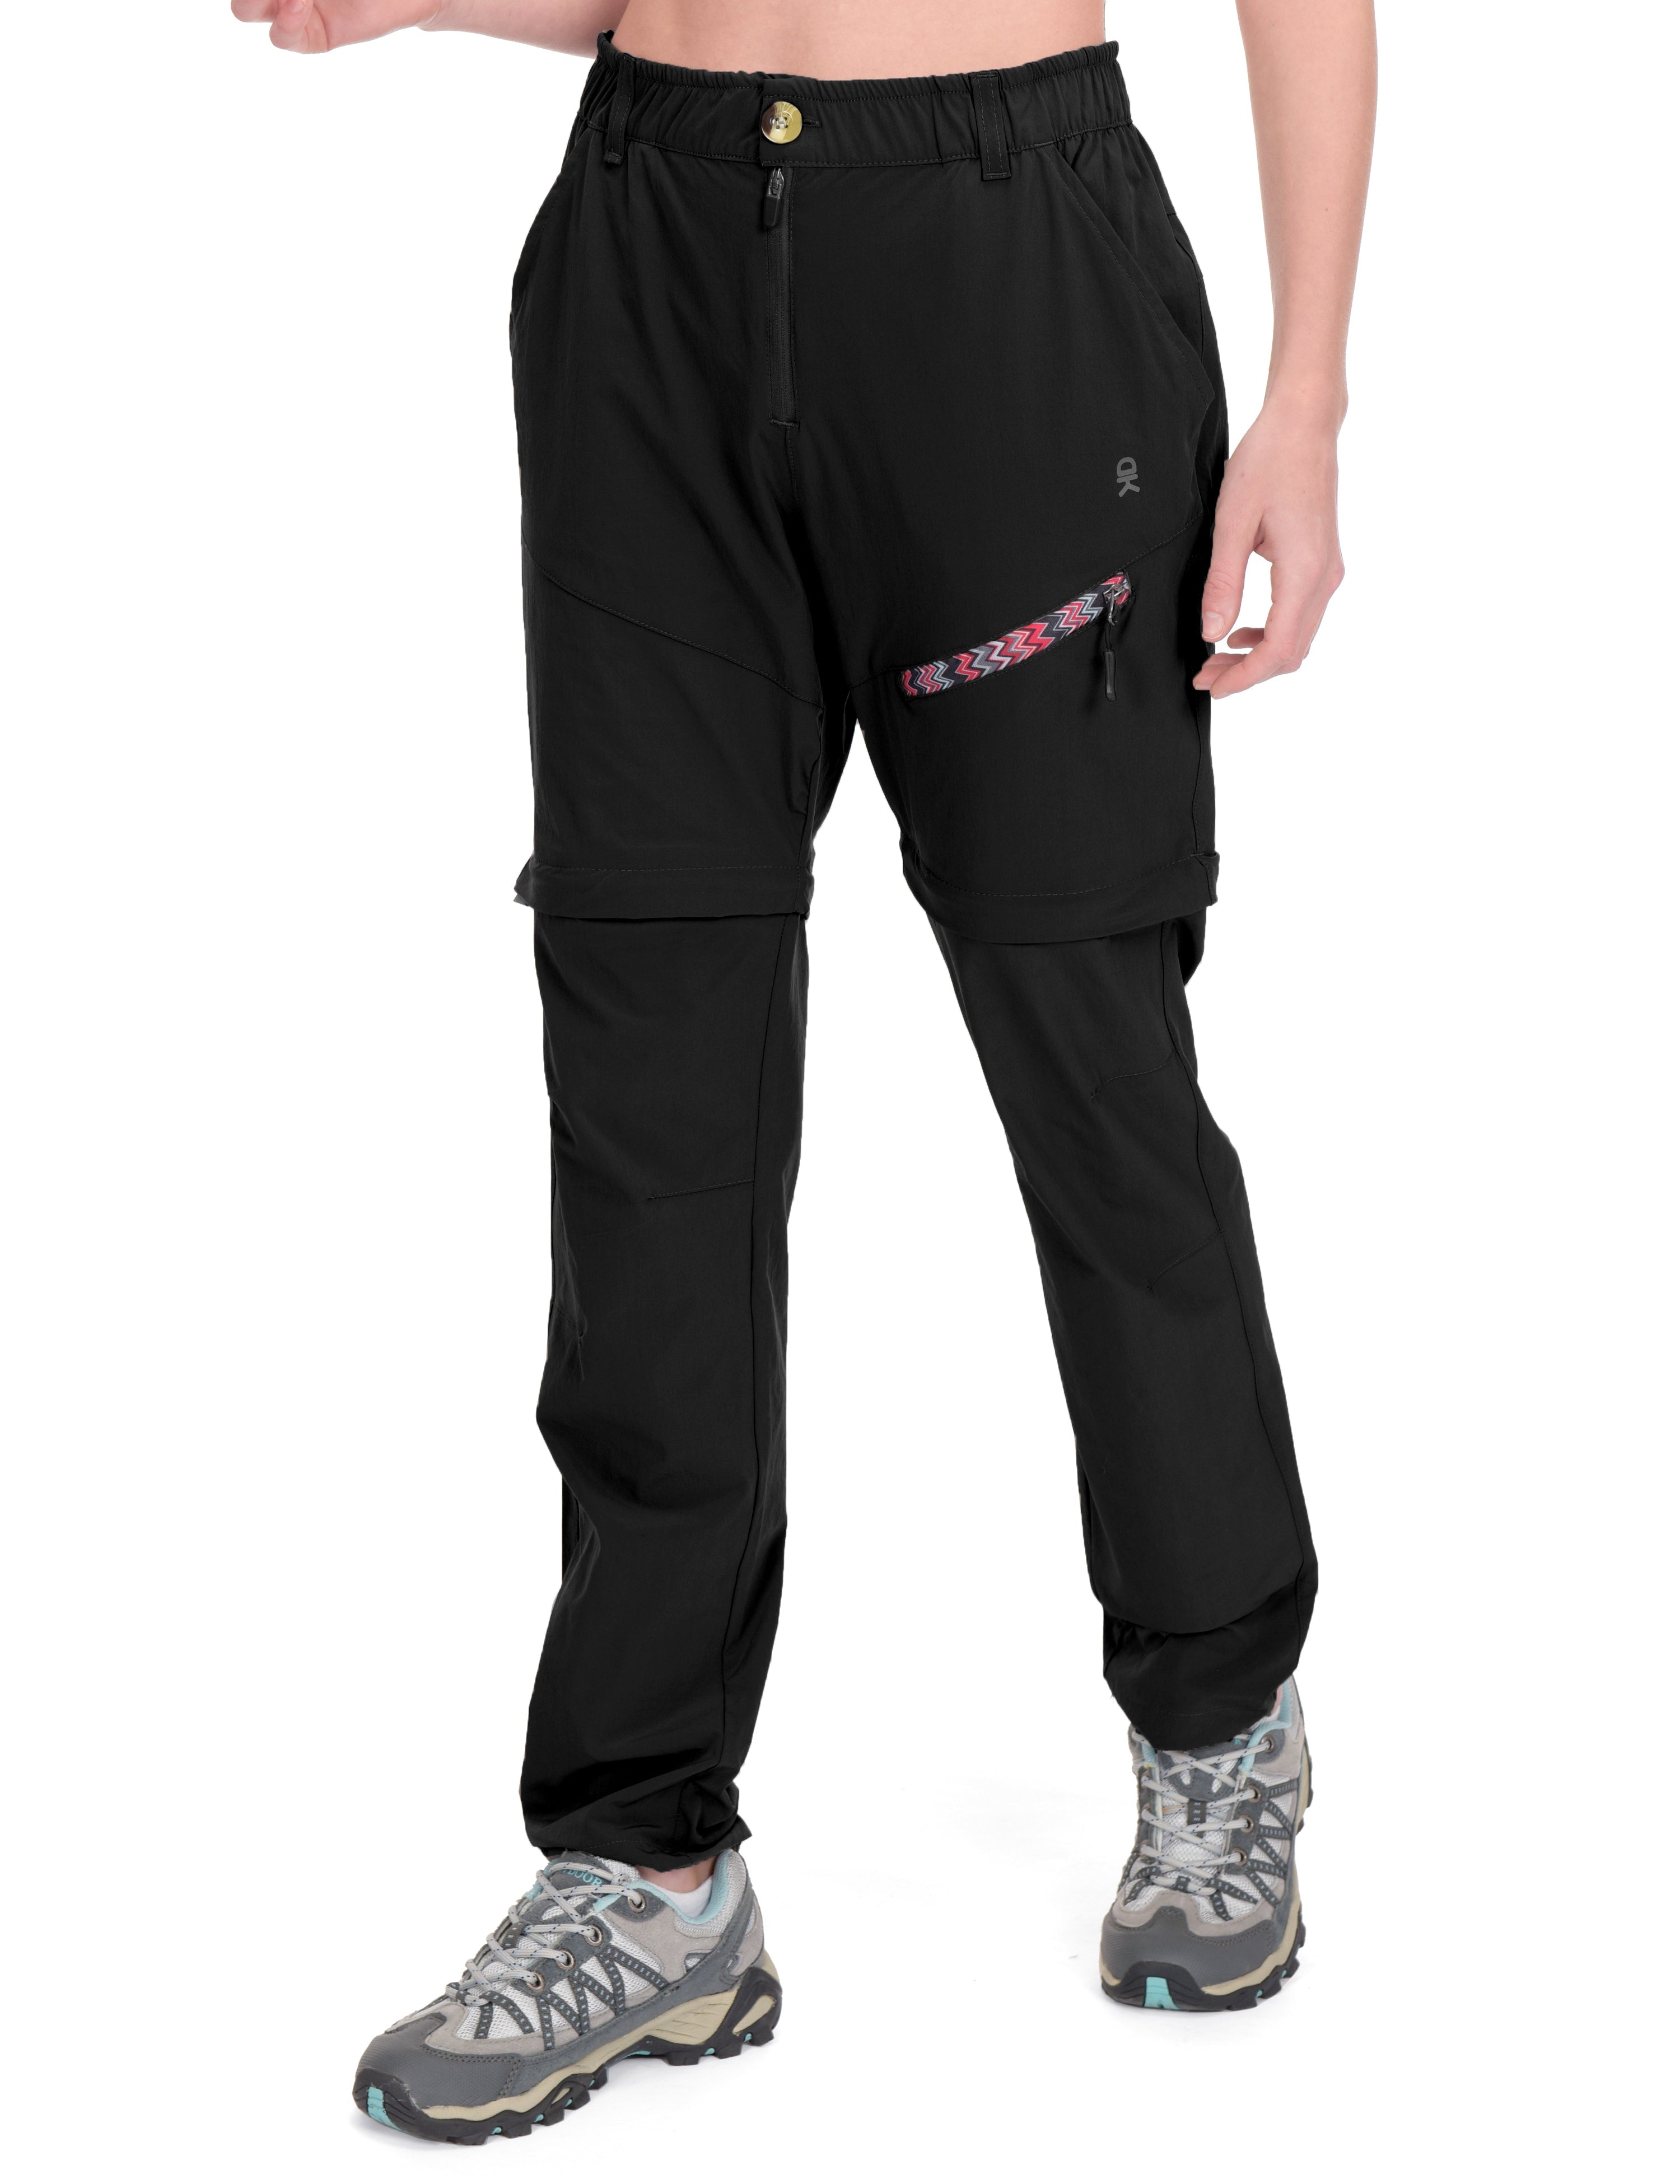 Buy TBMPOY Men's Lightweight Hiking Pants Quick Dry Mountain Fishing Cargo  Outdoor Pants(03 Thin Dark Grey,us M) Online at Low Prices in India -  Amazon.in